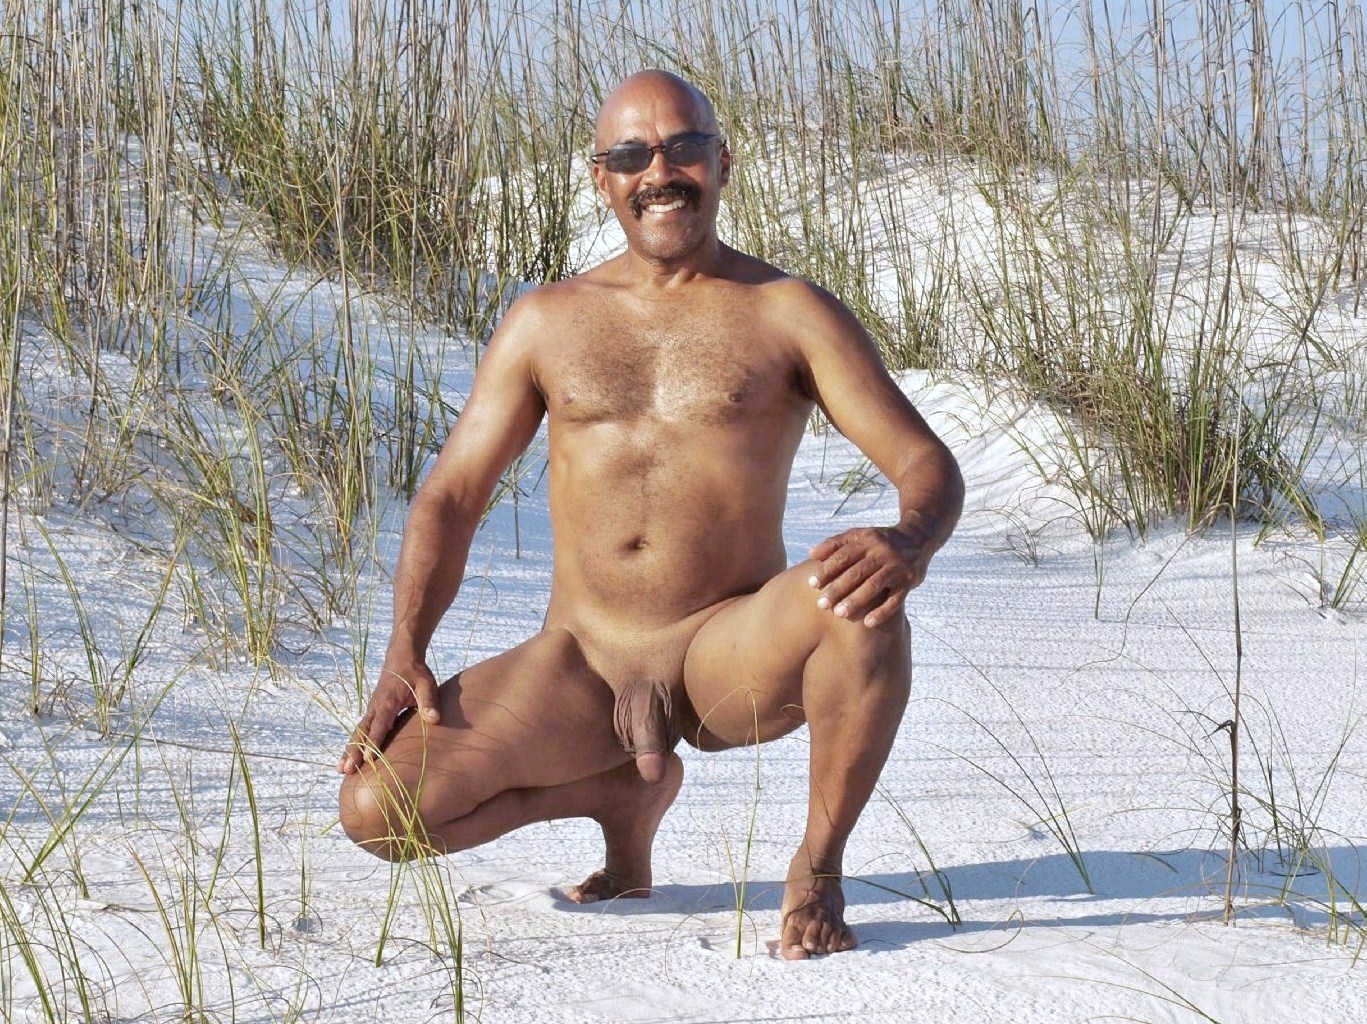 dave soderquist recommends naked black mature men pic